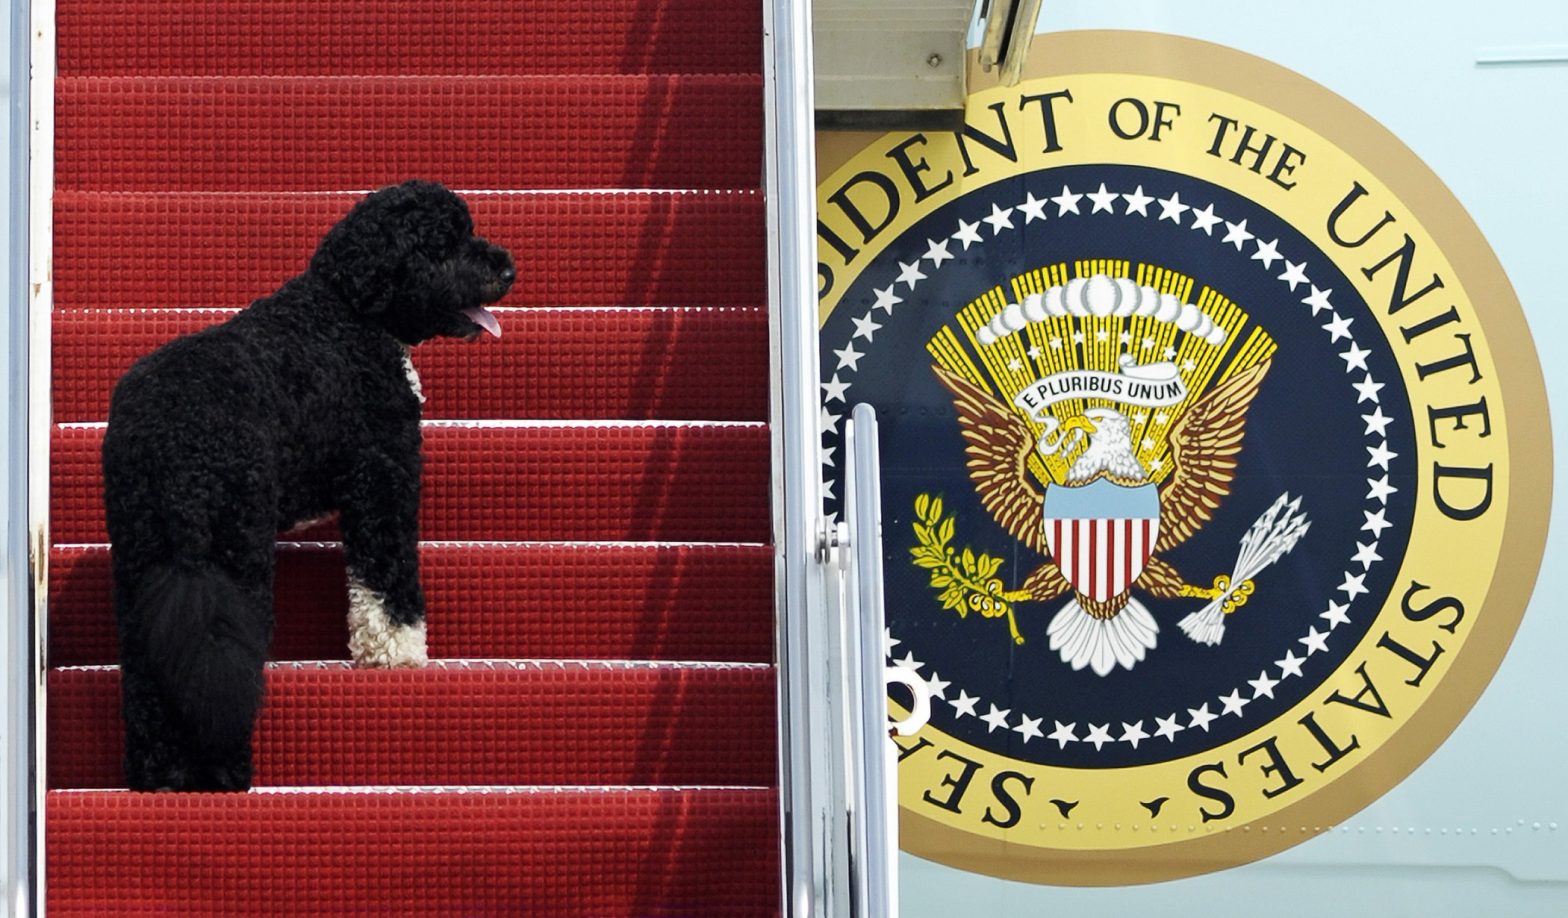 Pets Are Back: Biden’s 2 Dogs Settle in at White House